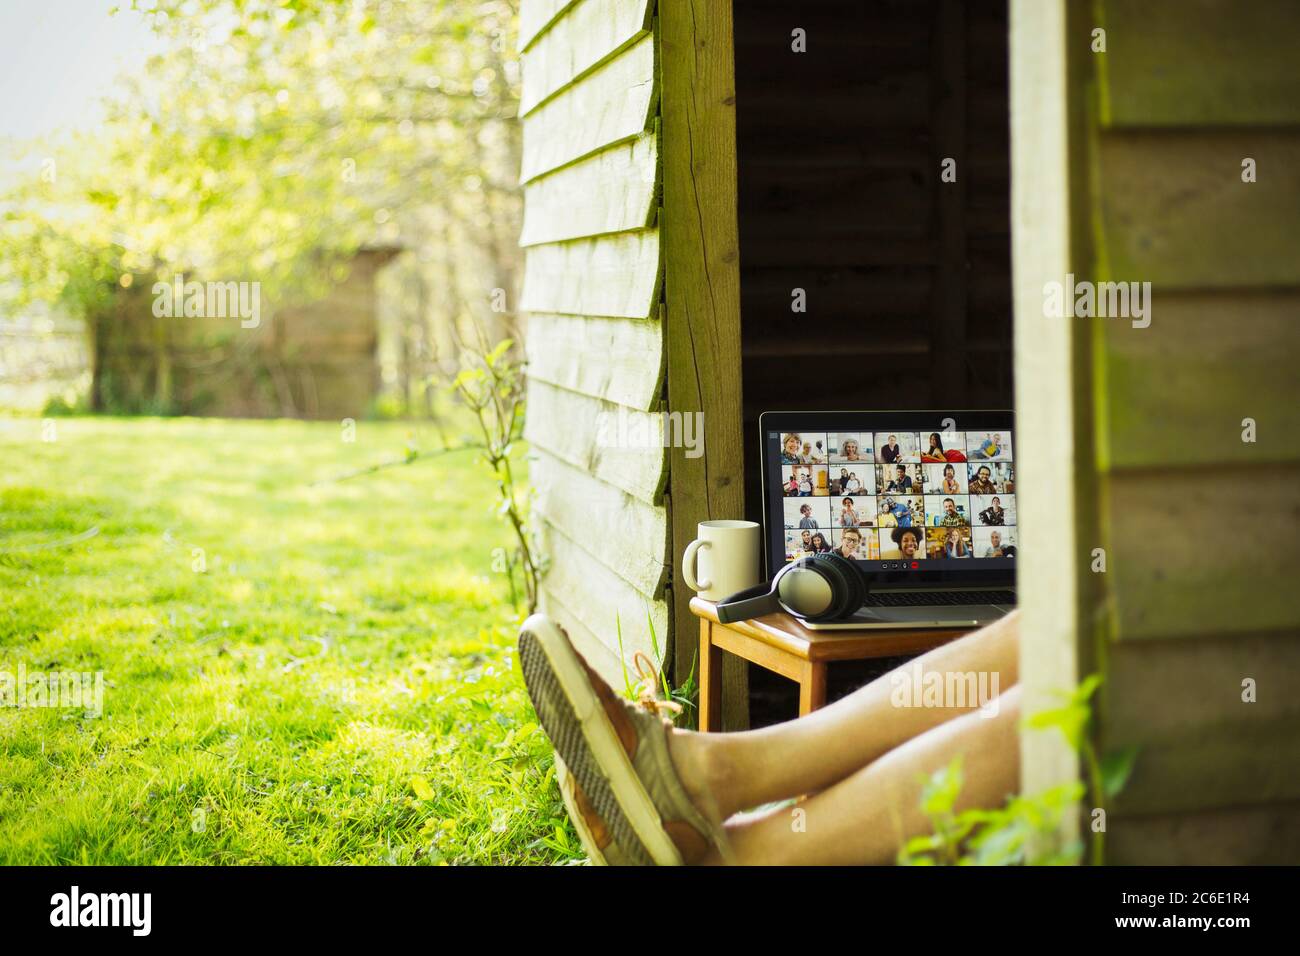 Man with laptop enjoying video conference from garden shed Stock Photo